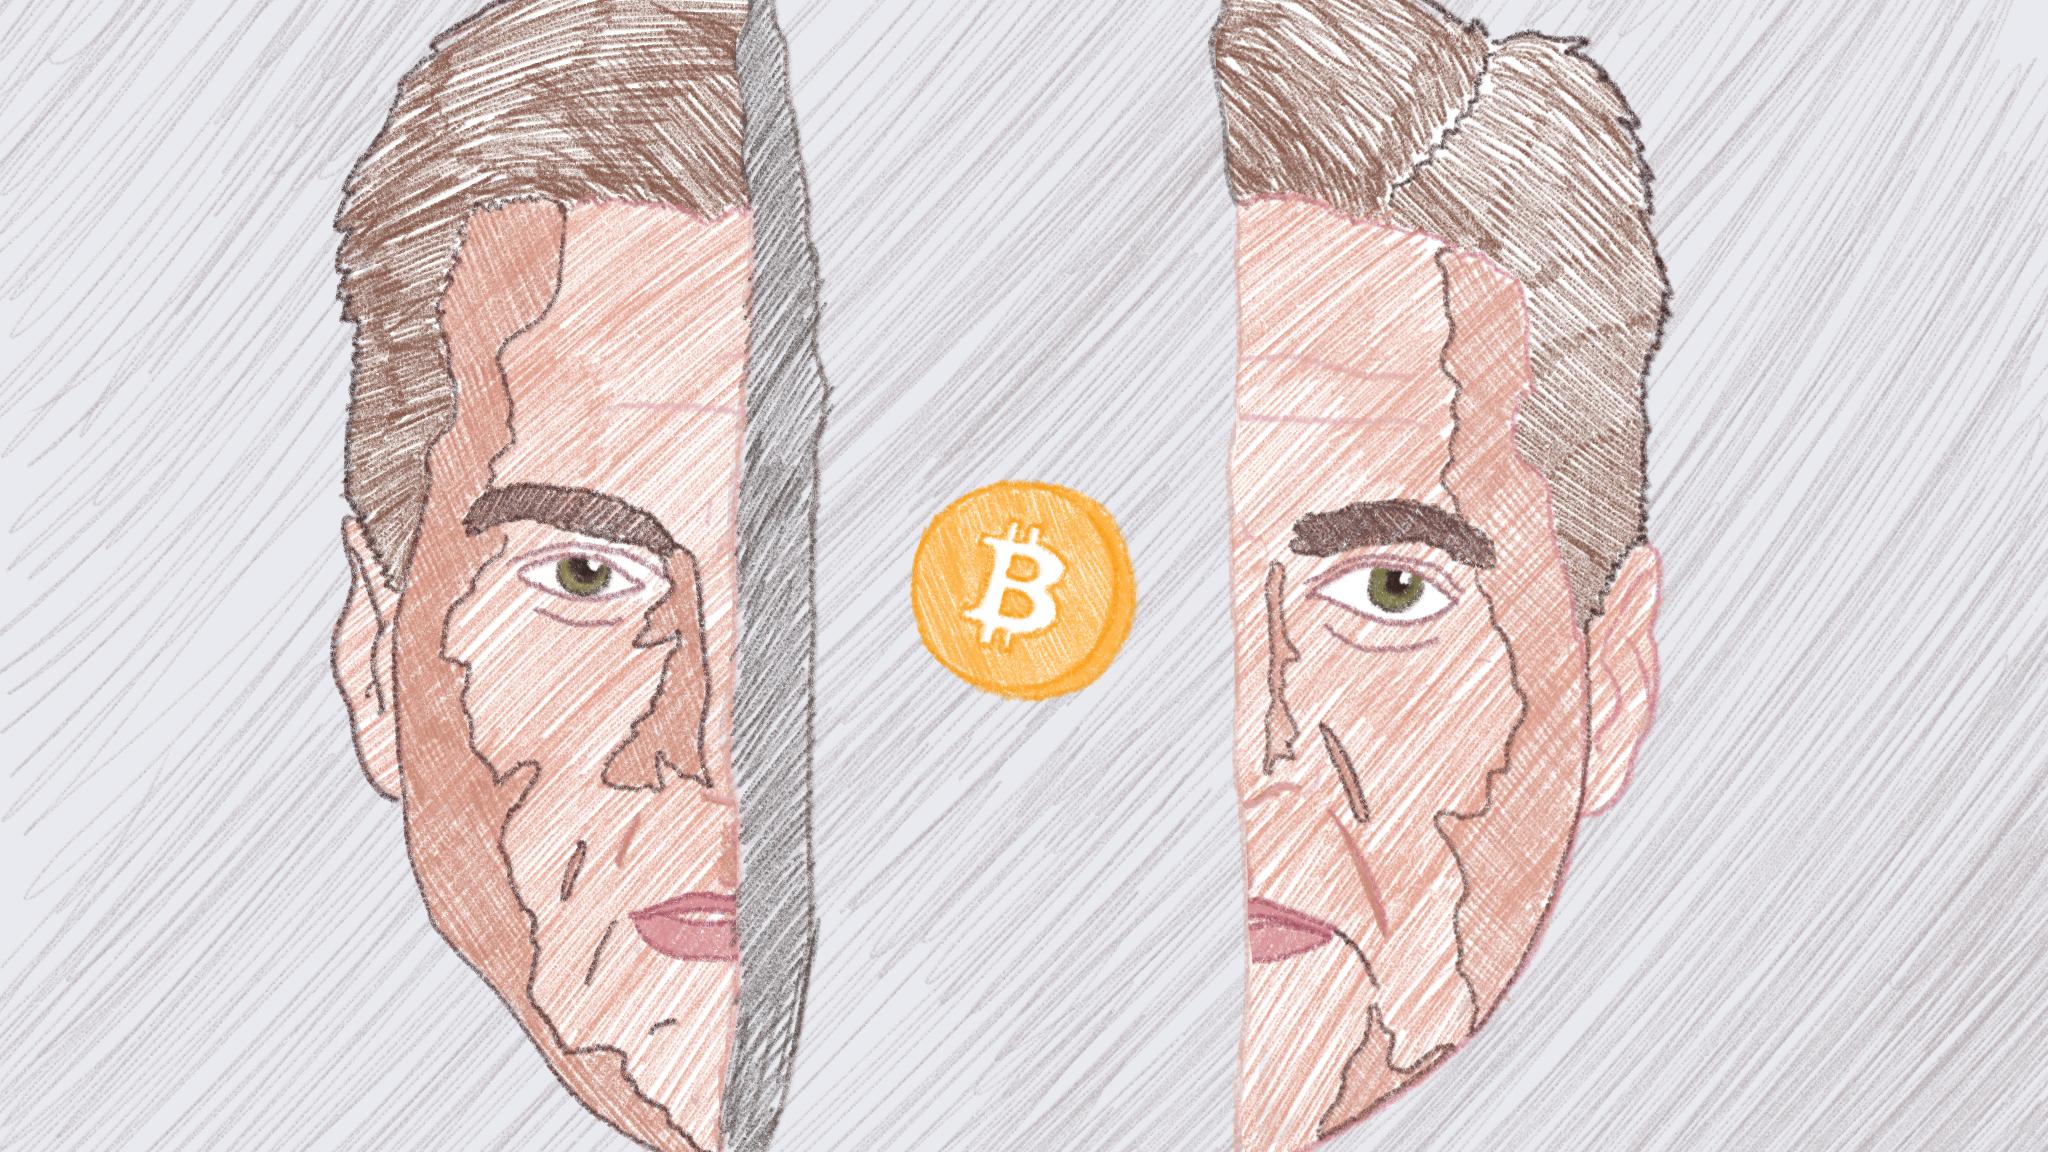 Craig Wright Couldn’t Prove He Invented Bitcoin, But He’s Back Anyway - Motherboard